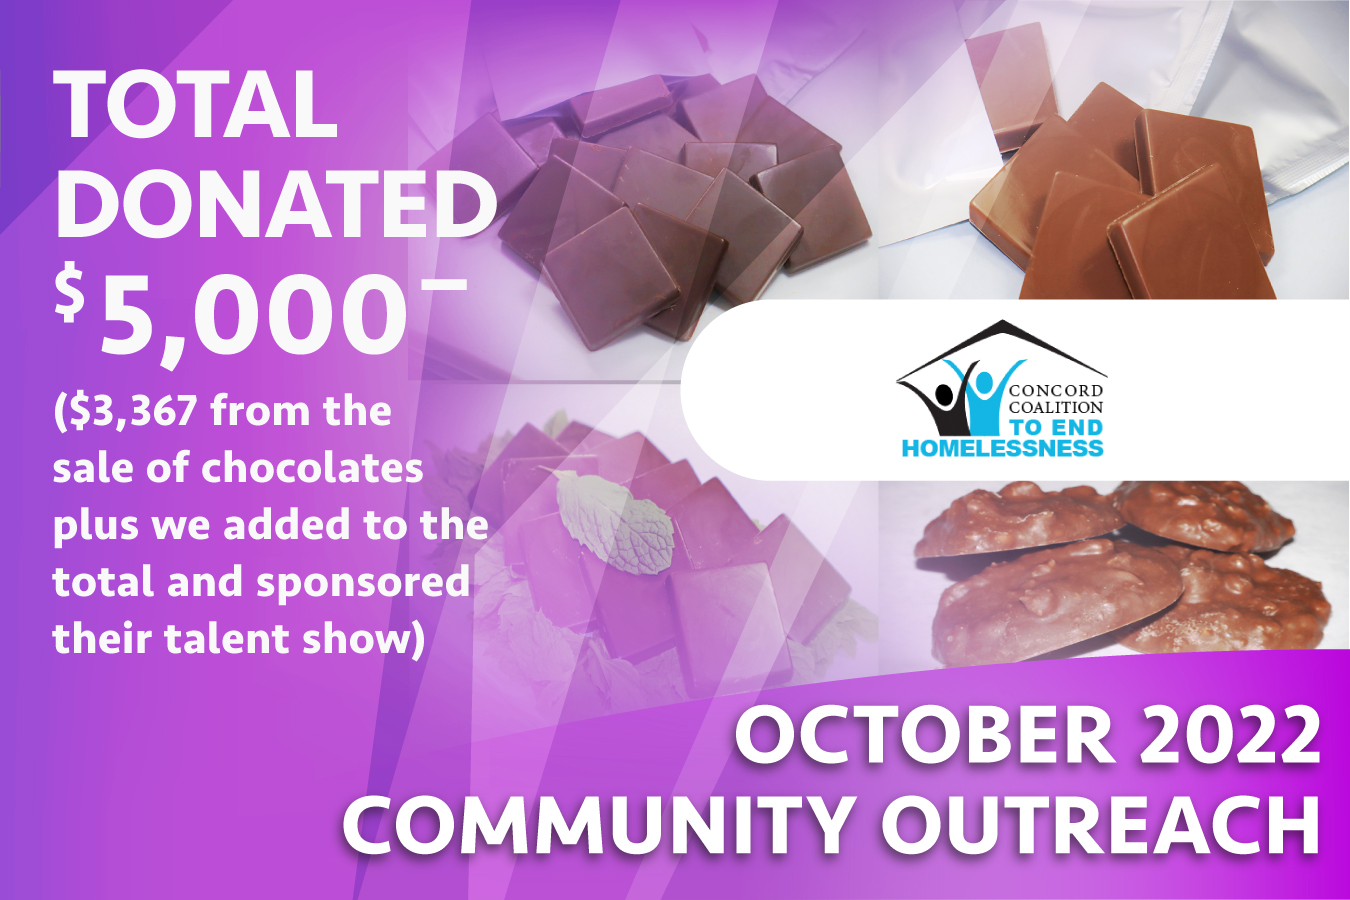 Graphic promoting our October 2022 Community Outreach benefactor - Concord Coalition to End Homelessness.